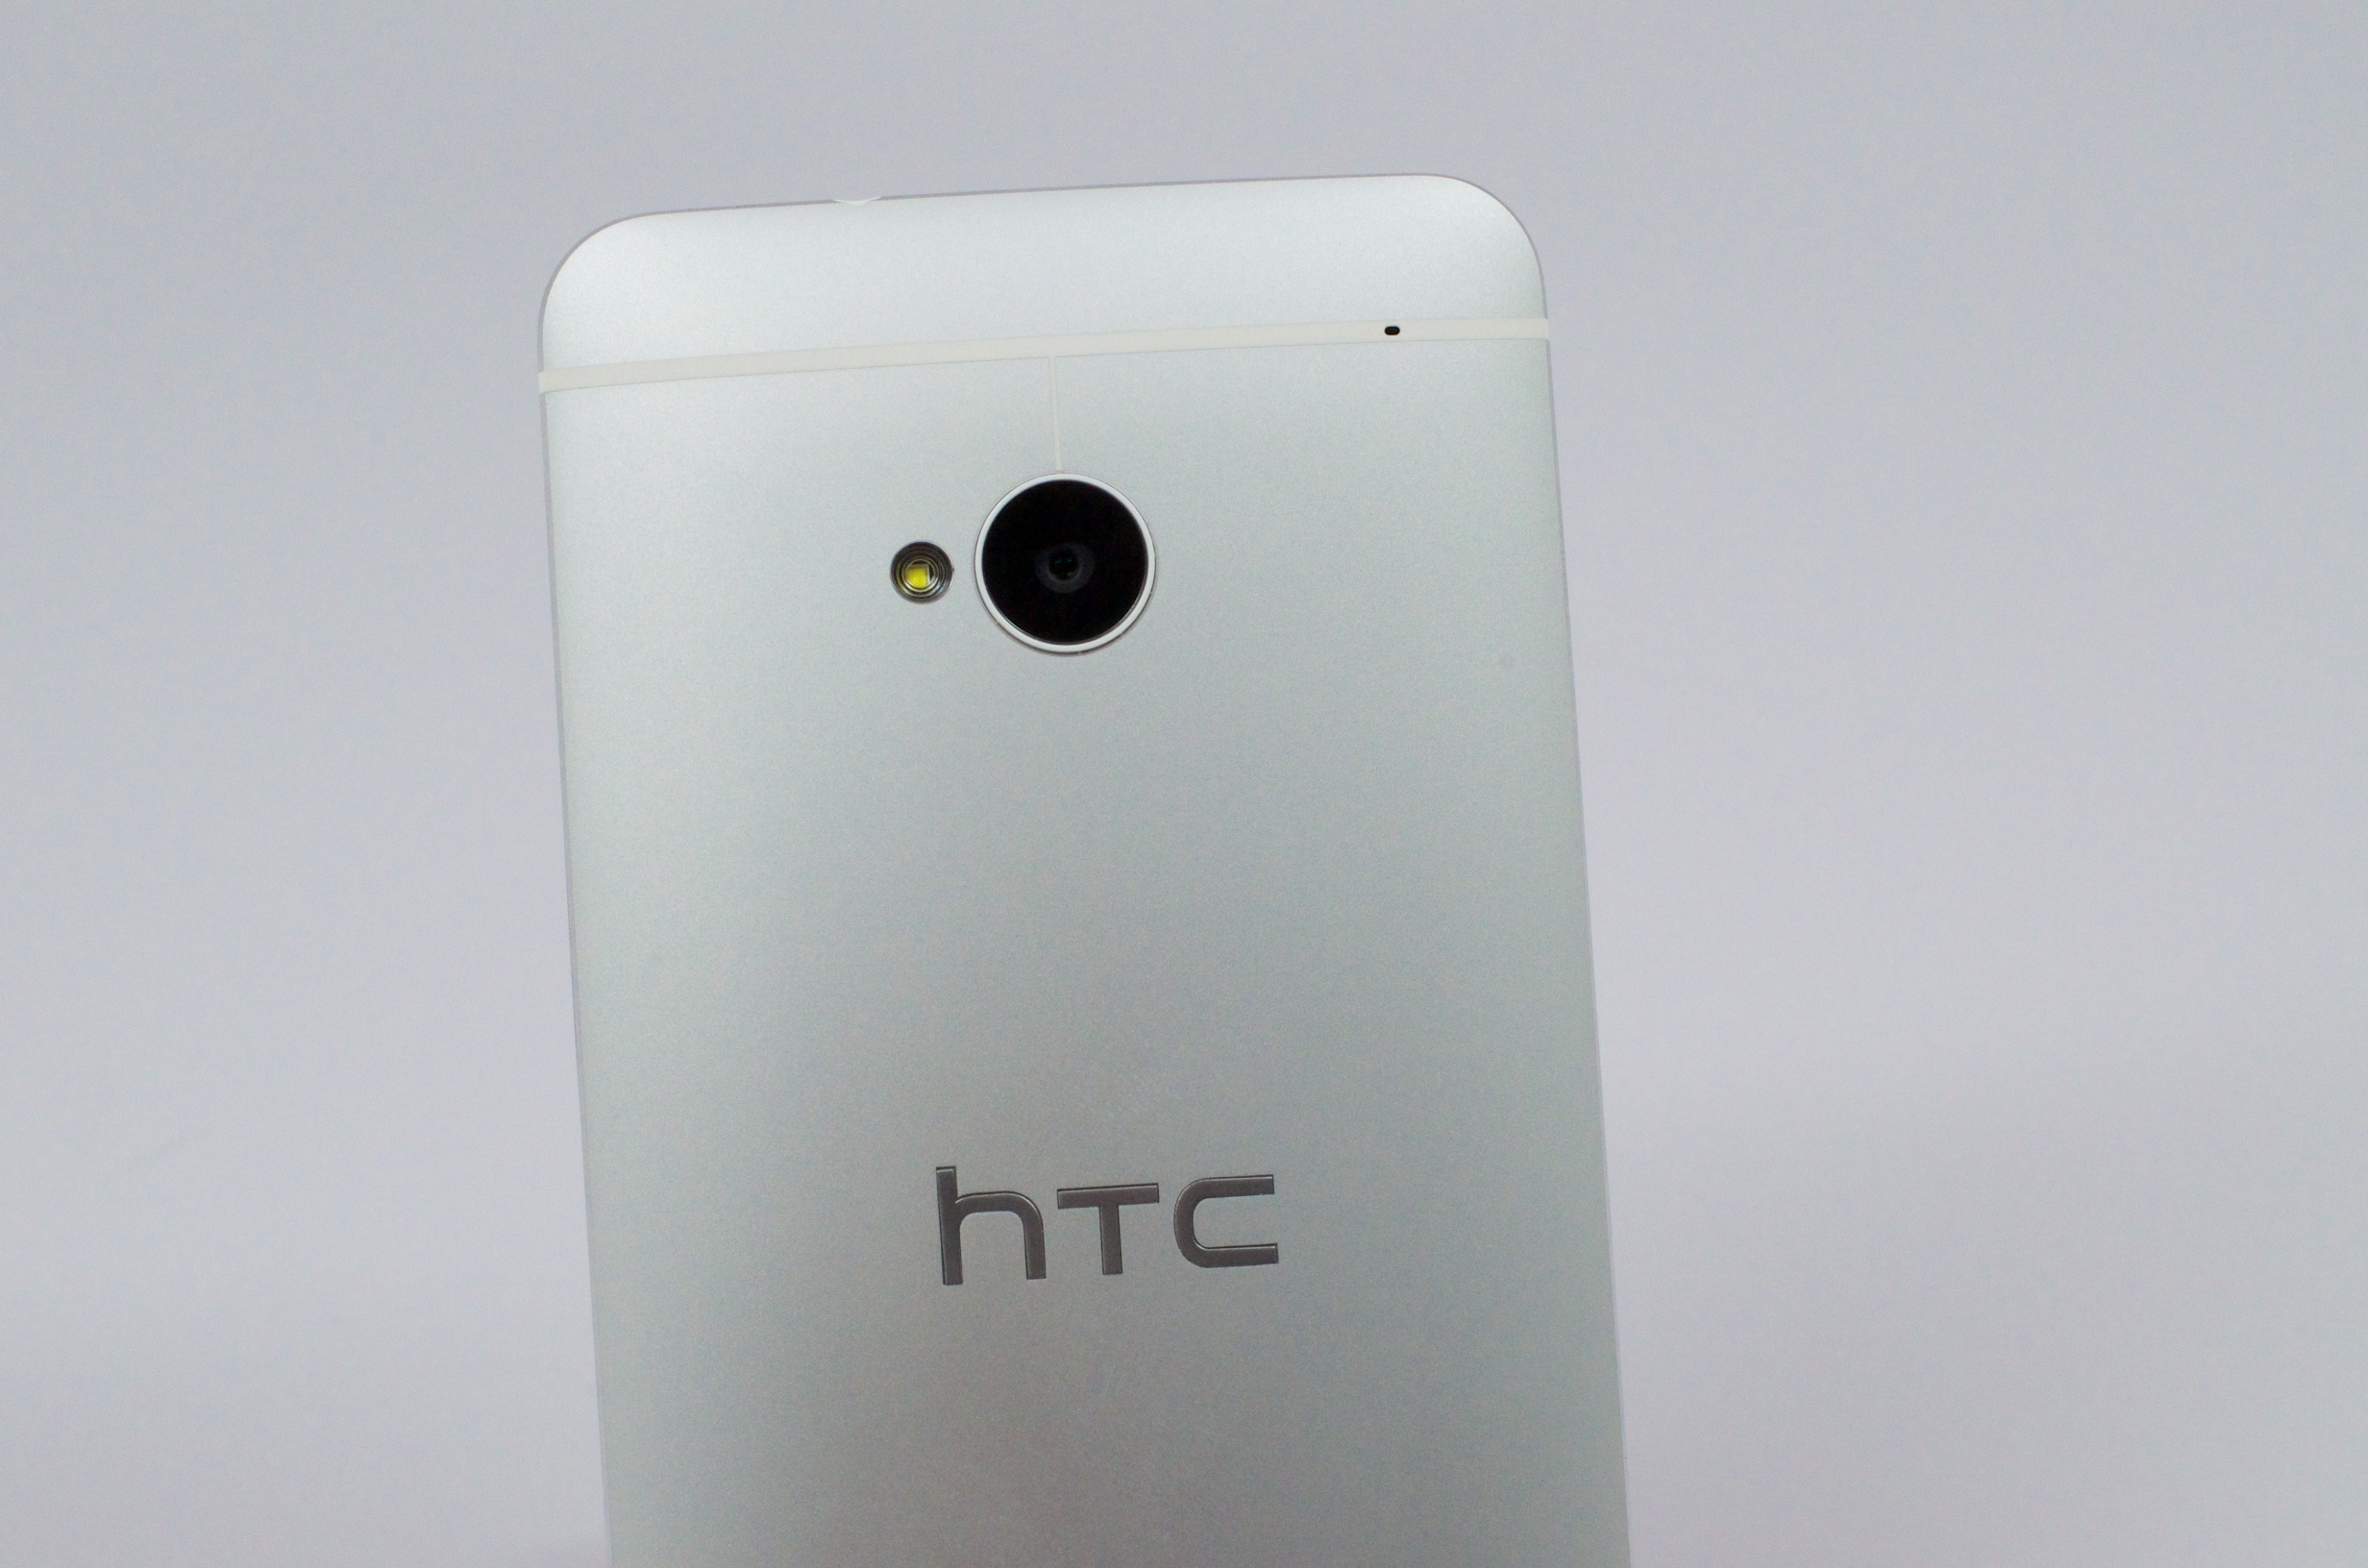 The HTC One features a 4MP Ultrapixel camera.